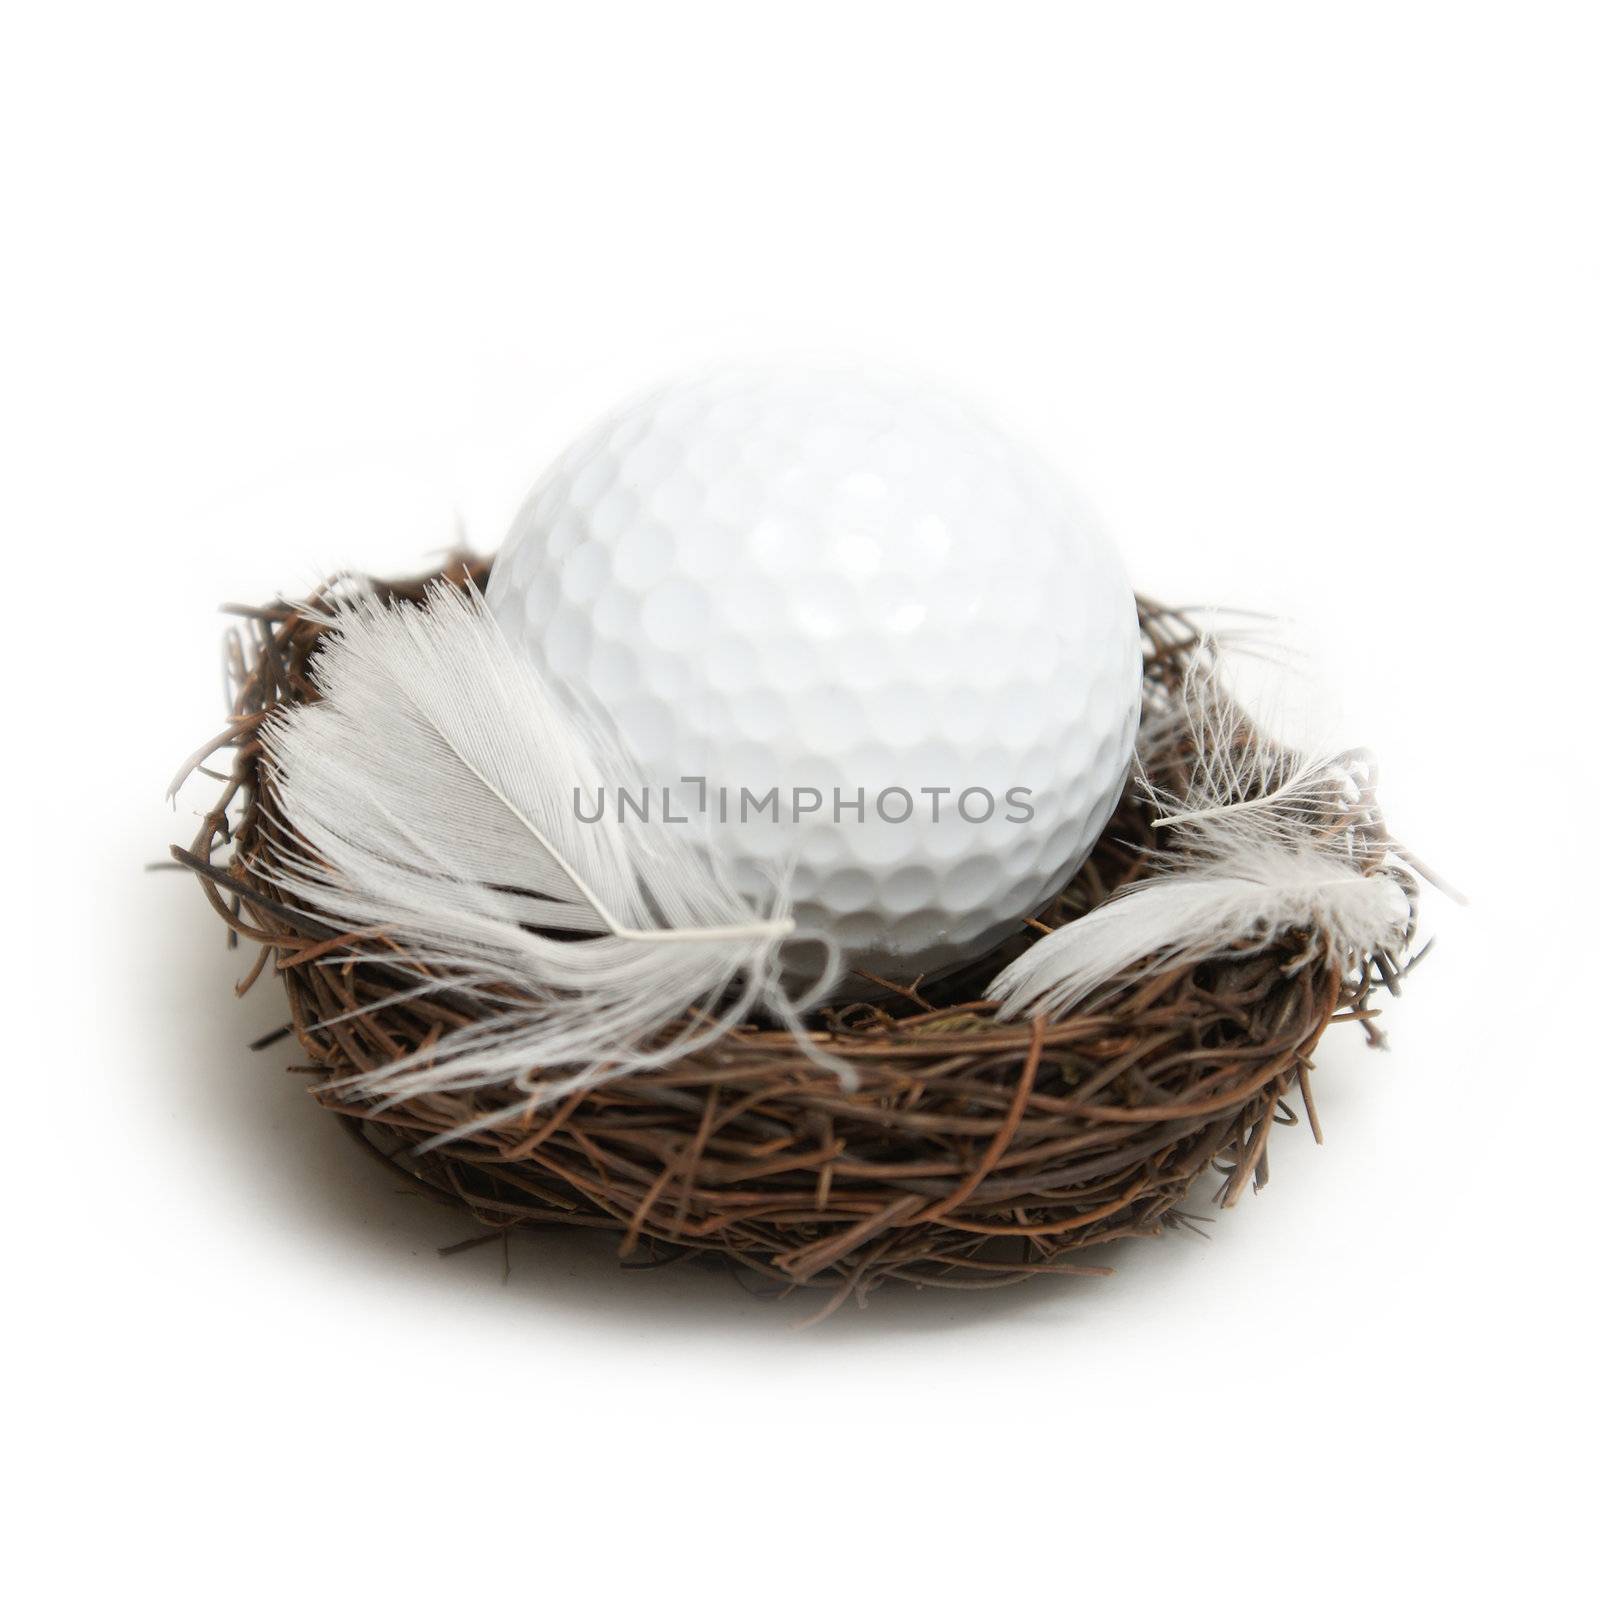 A conceptual golf ball inside a nest to give the idea of the future of golf.